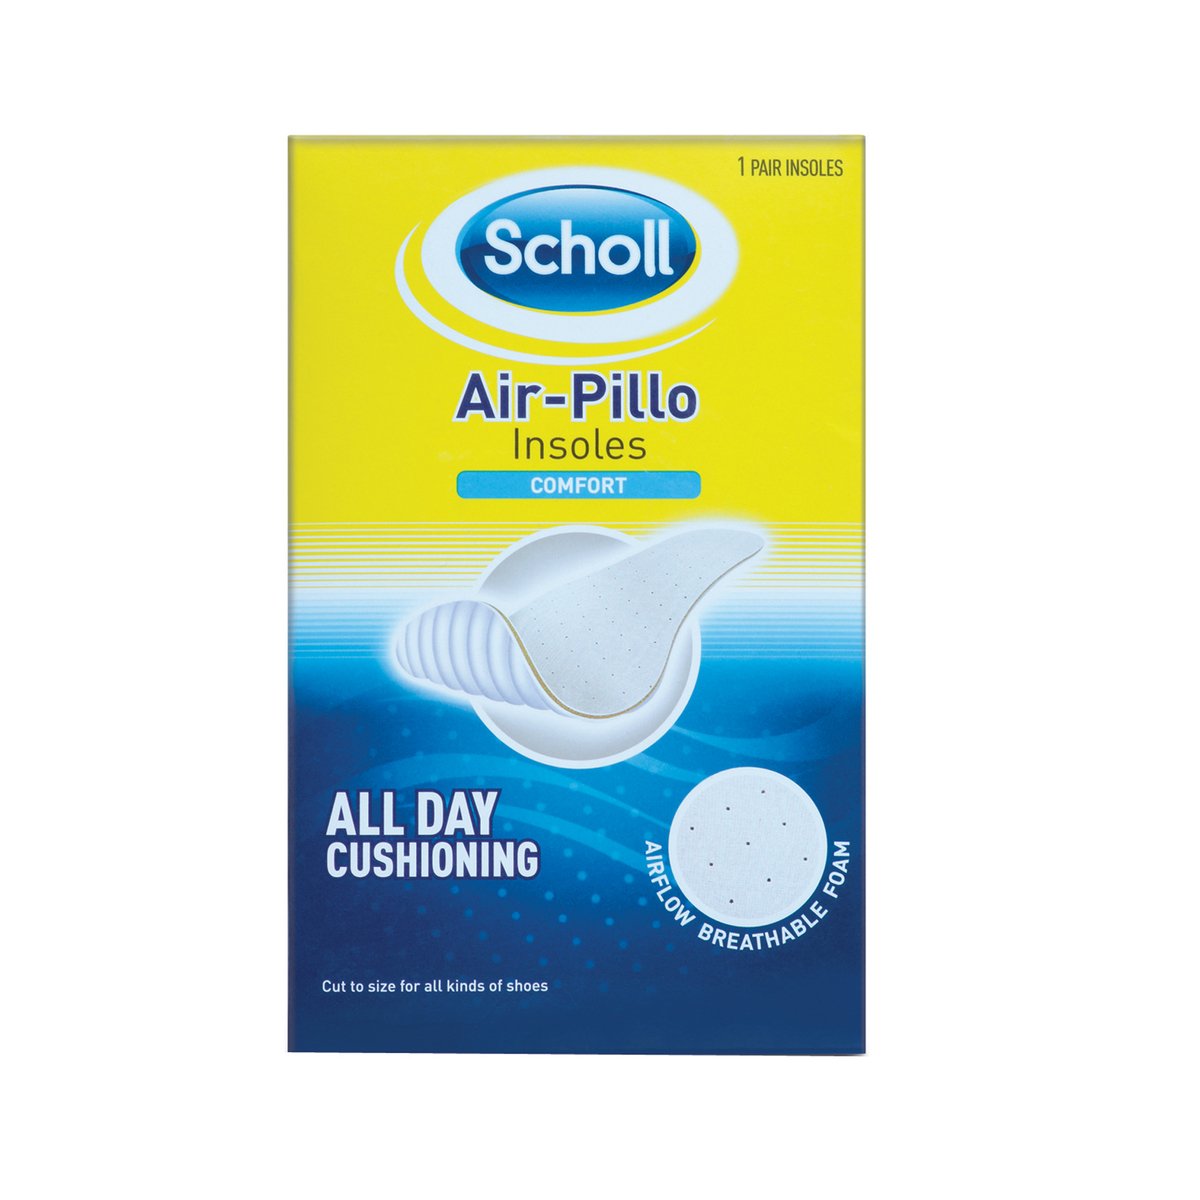 Scholl Foot Care Air-Pillo Comfort Insoles